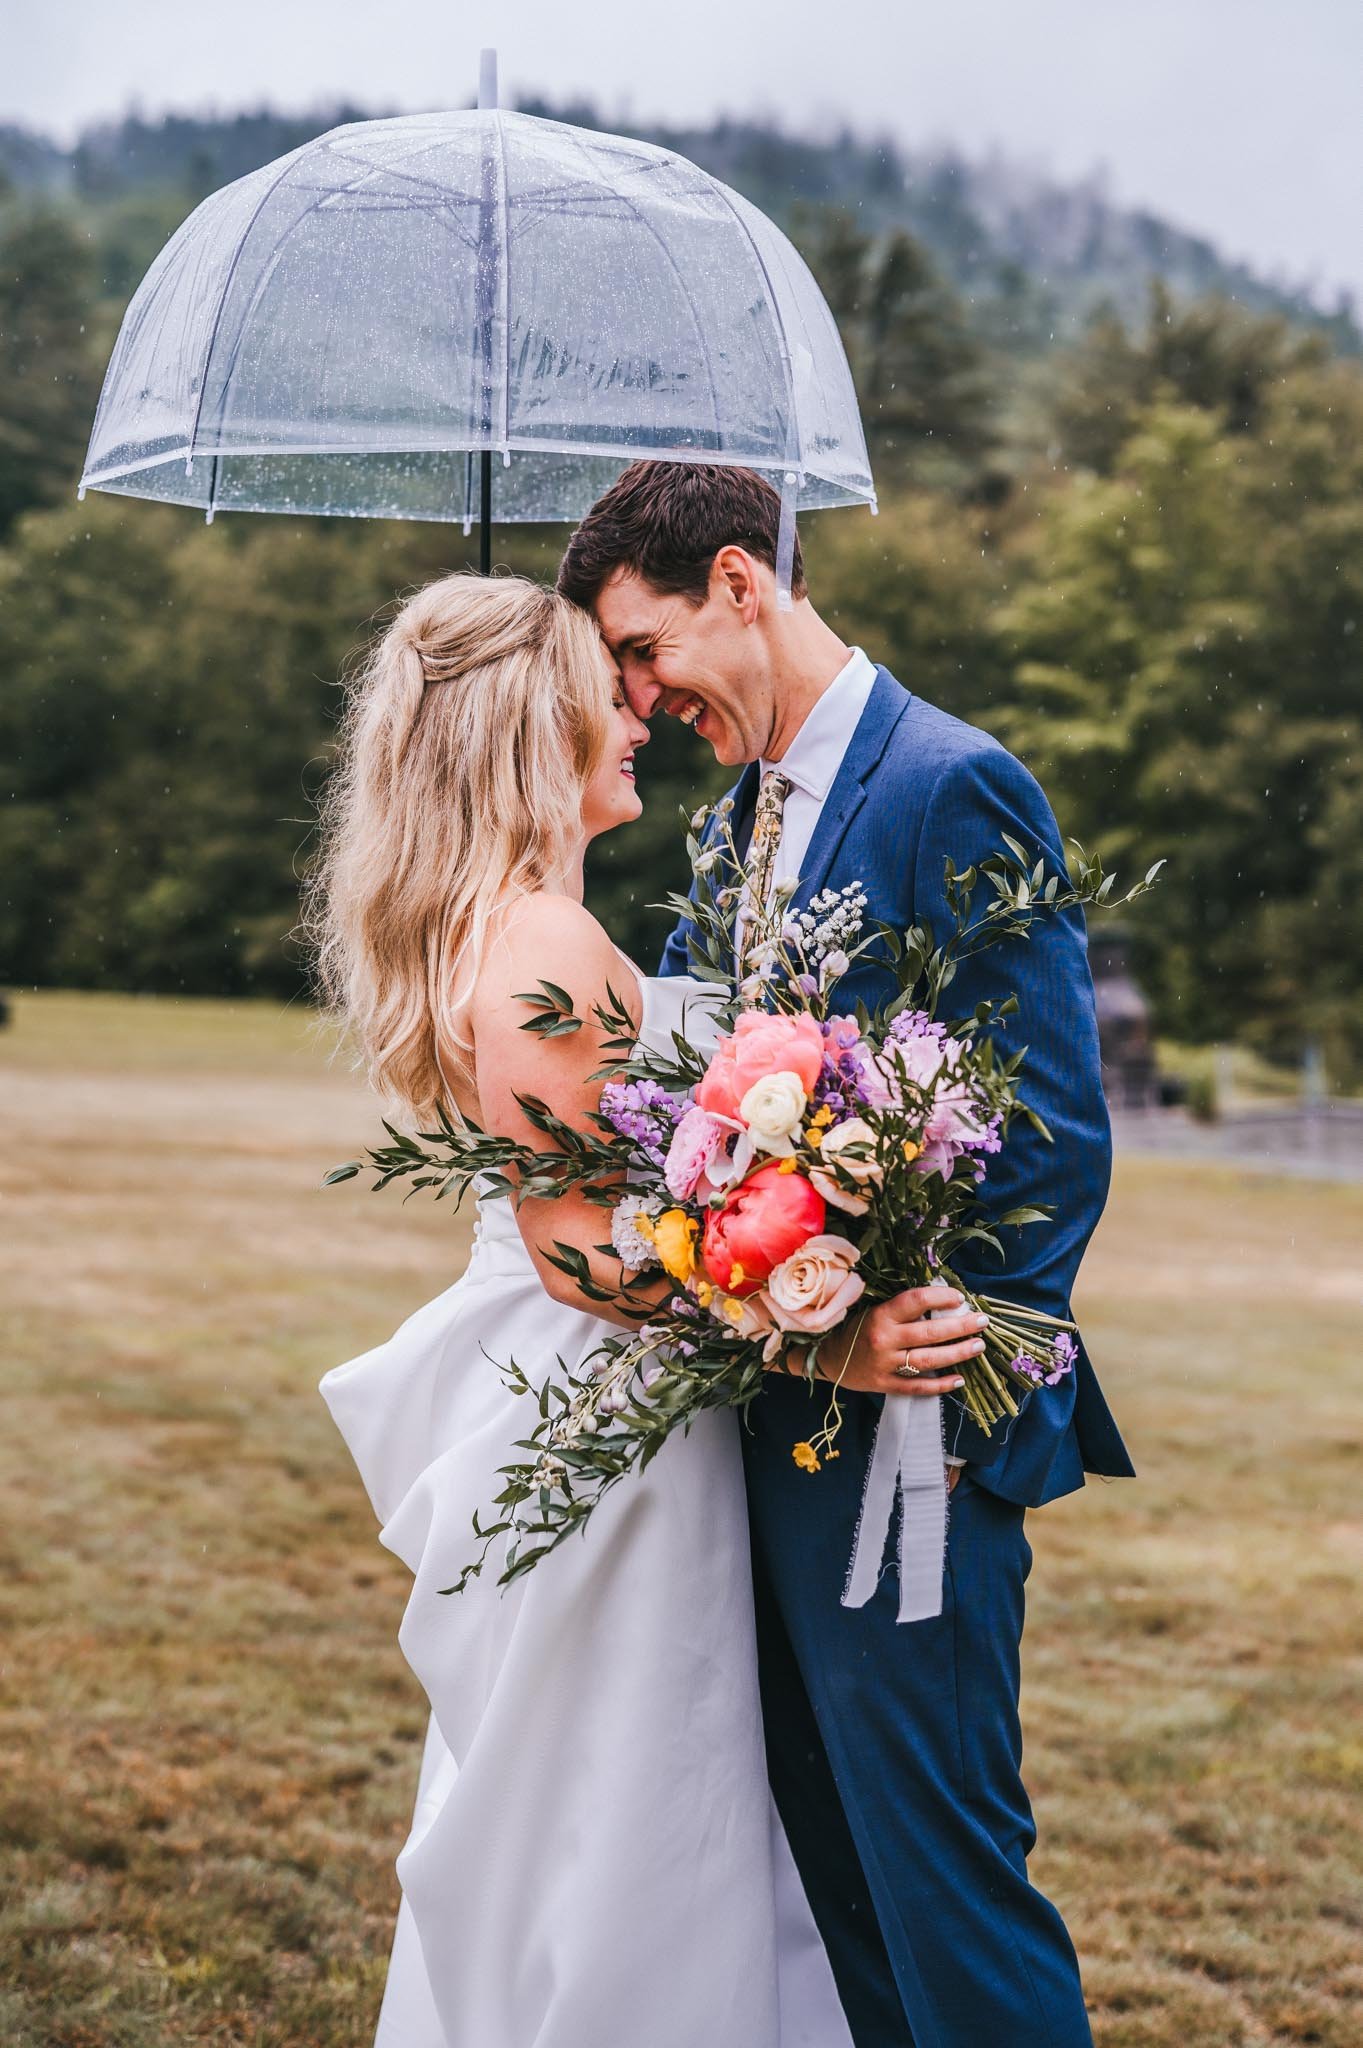 Seeing that we are entering wedding season on this cloudy day, we'd like to remind all couples tying the knot in 2024 that rain on your wedding day can actually be incredibly special.
ㅤ
We know, we know - everyone says that you really won't mind the 